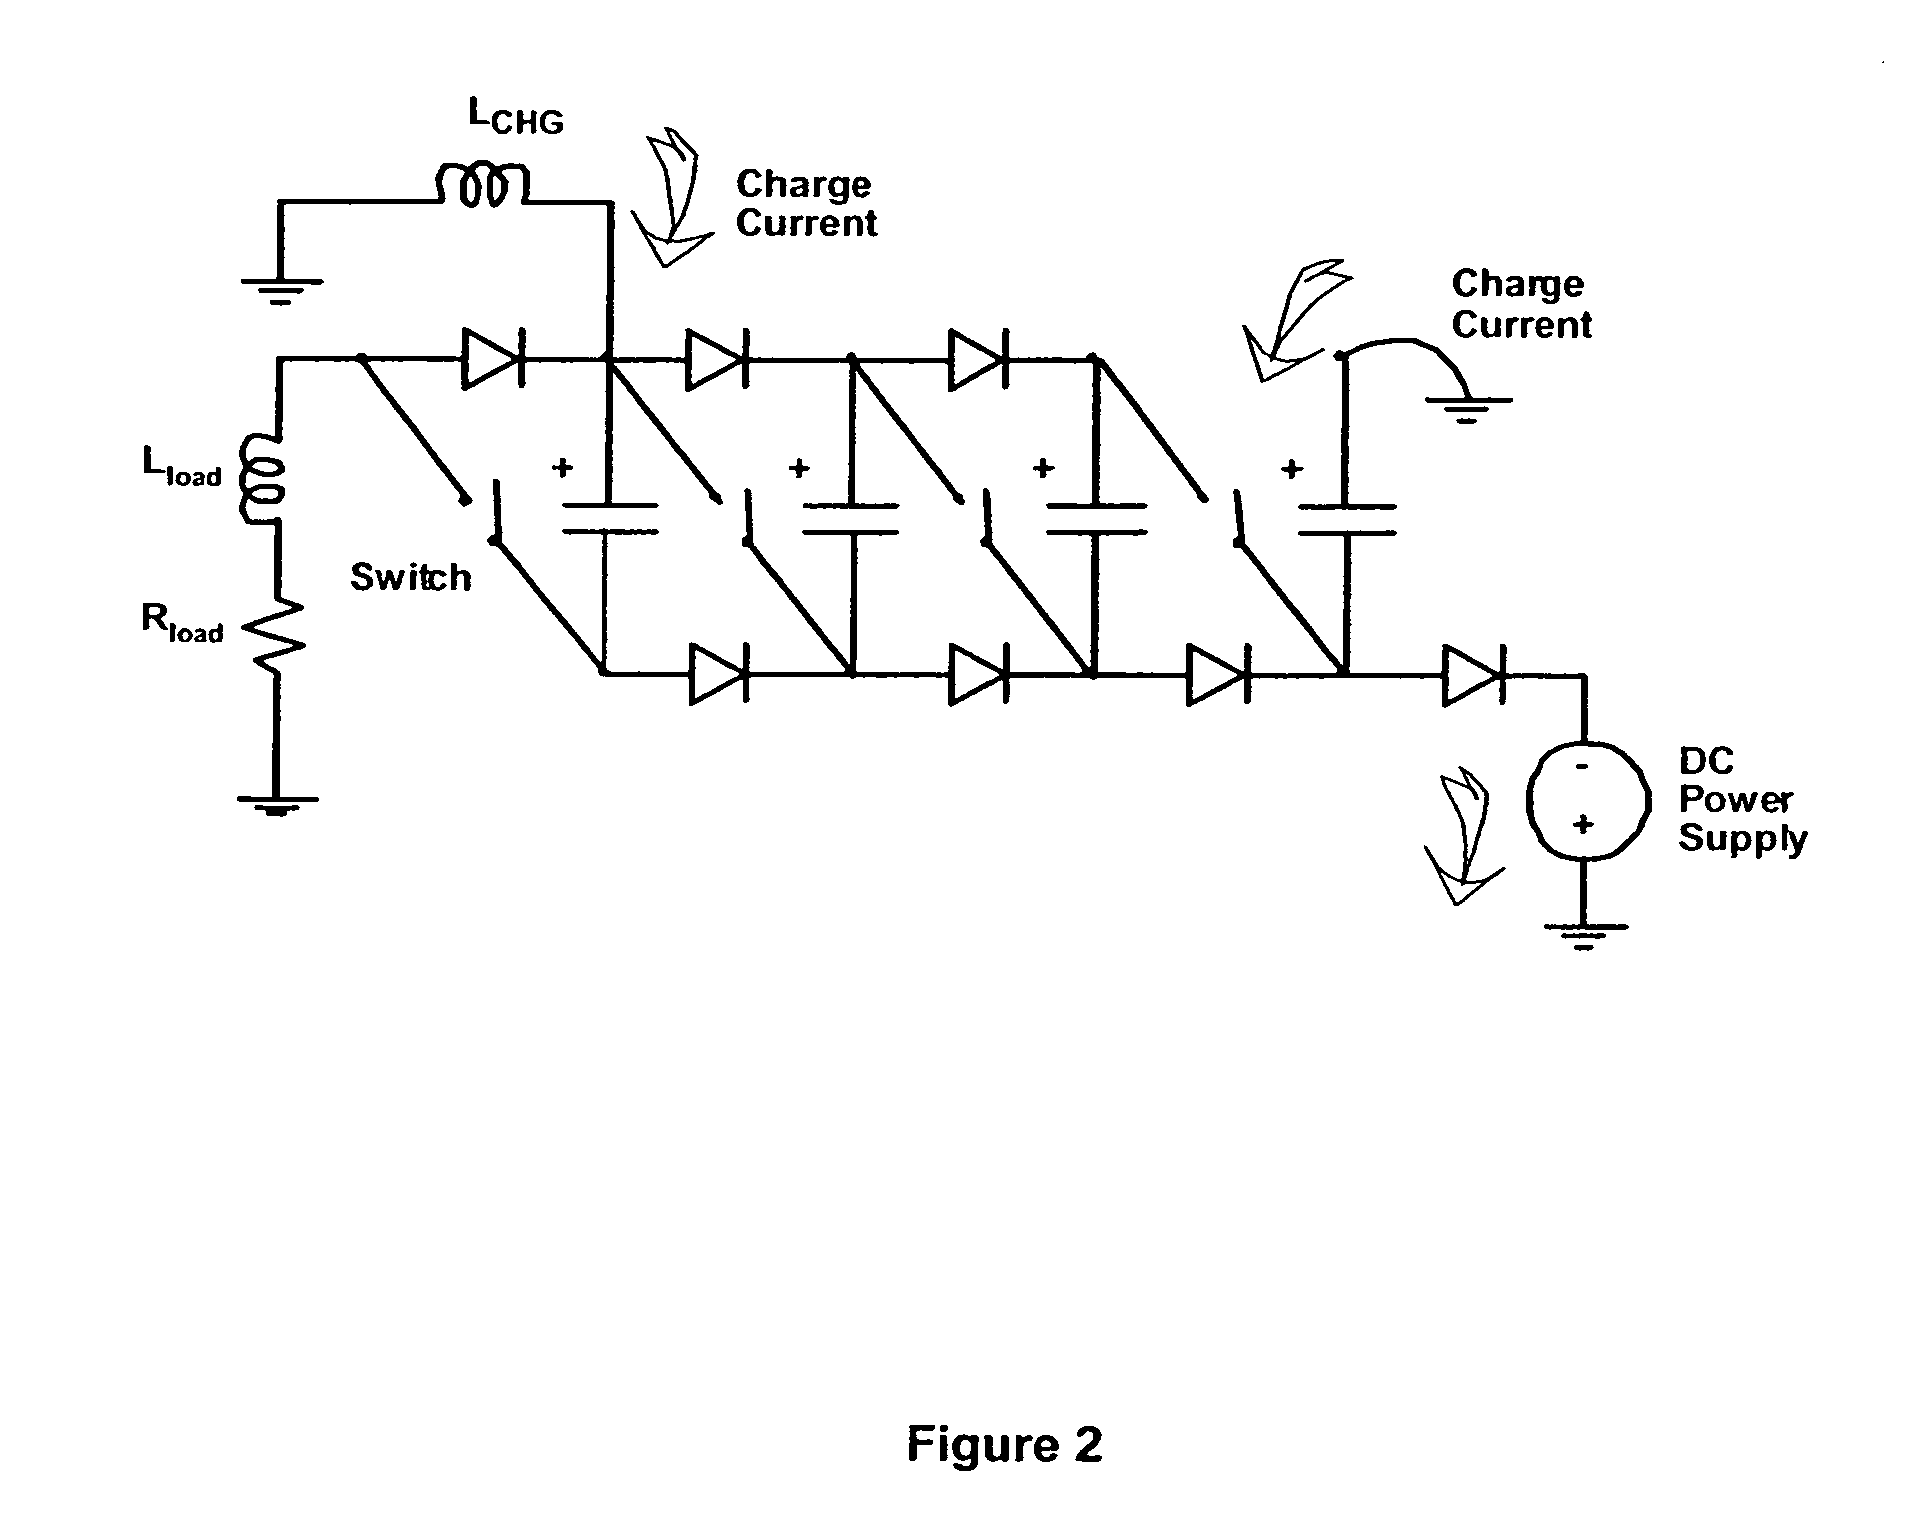 Apparatus for producing voltage and current pulses